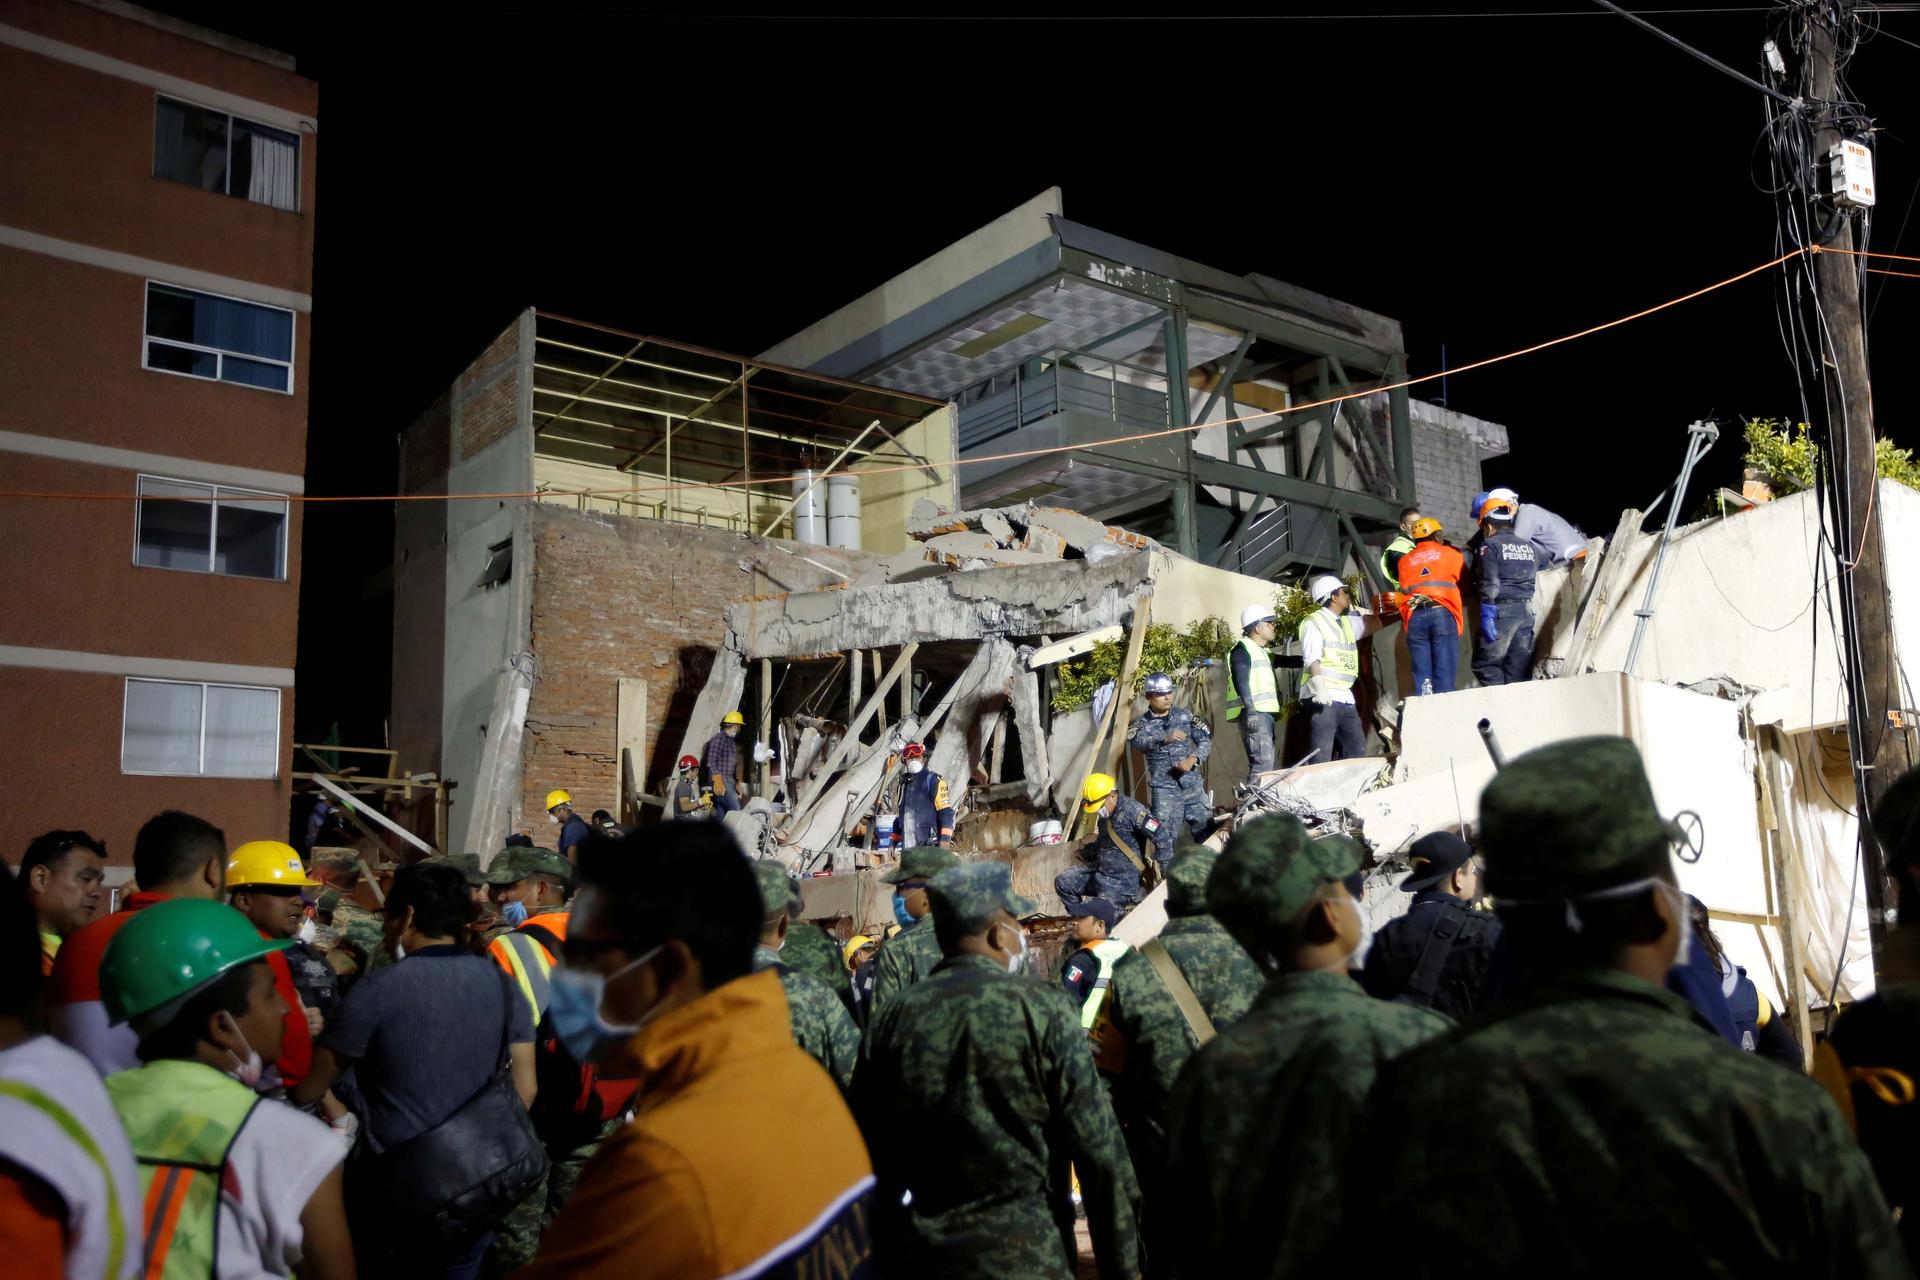 Rescue workers search through rubble during a floodlit search for students at Enrique Rebsamen school in Mexico City on Sept. 20, 2017.